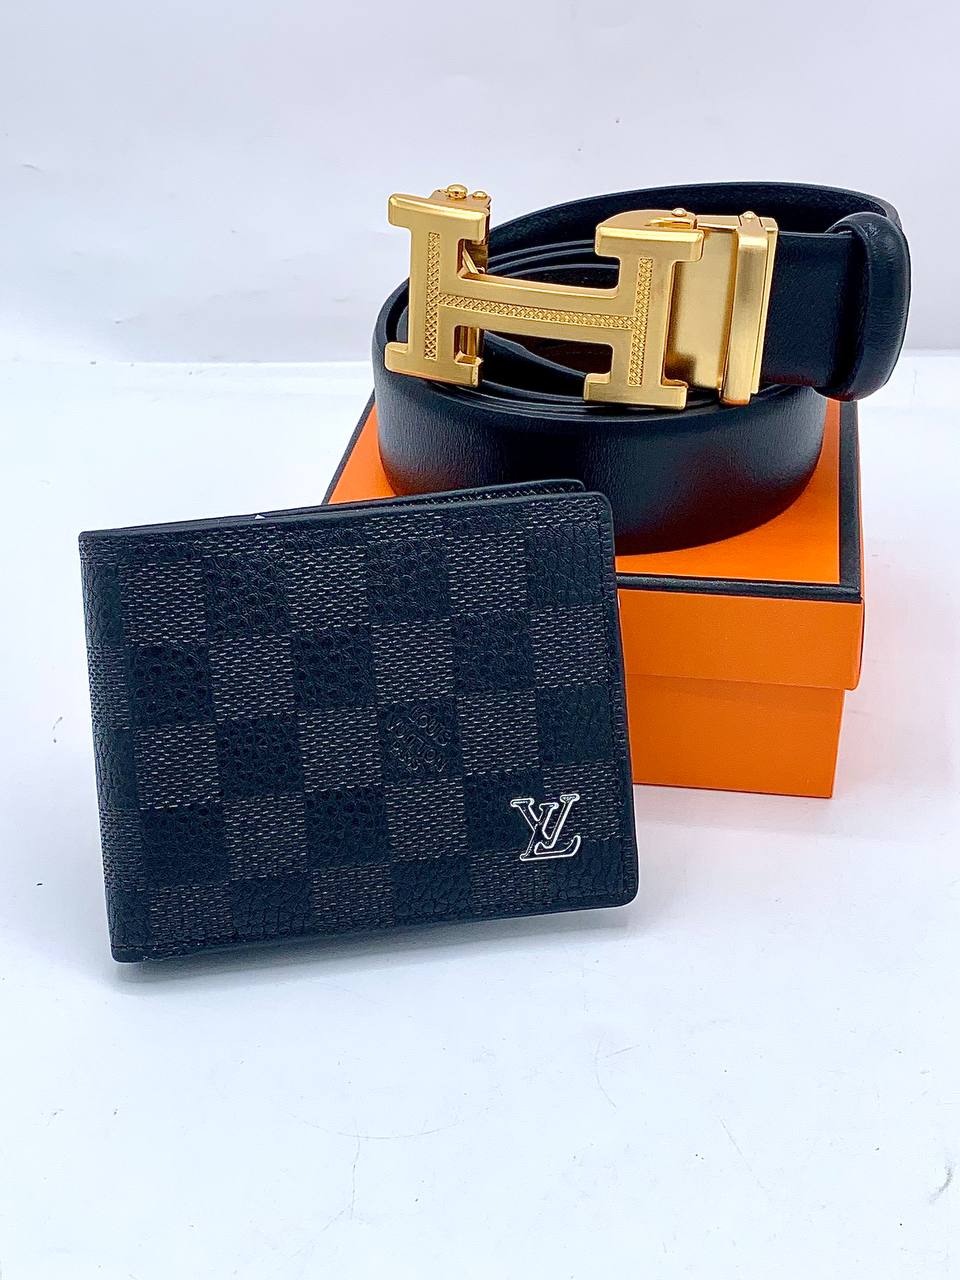 Branded Pierre Cardin Wallet & Belt Gift Sets are exceptional gifts fo